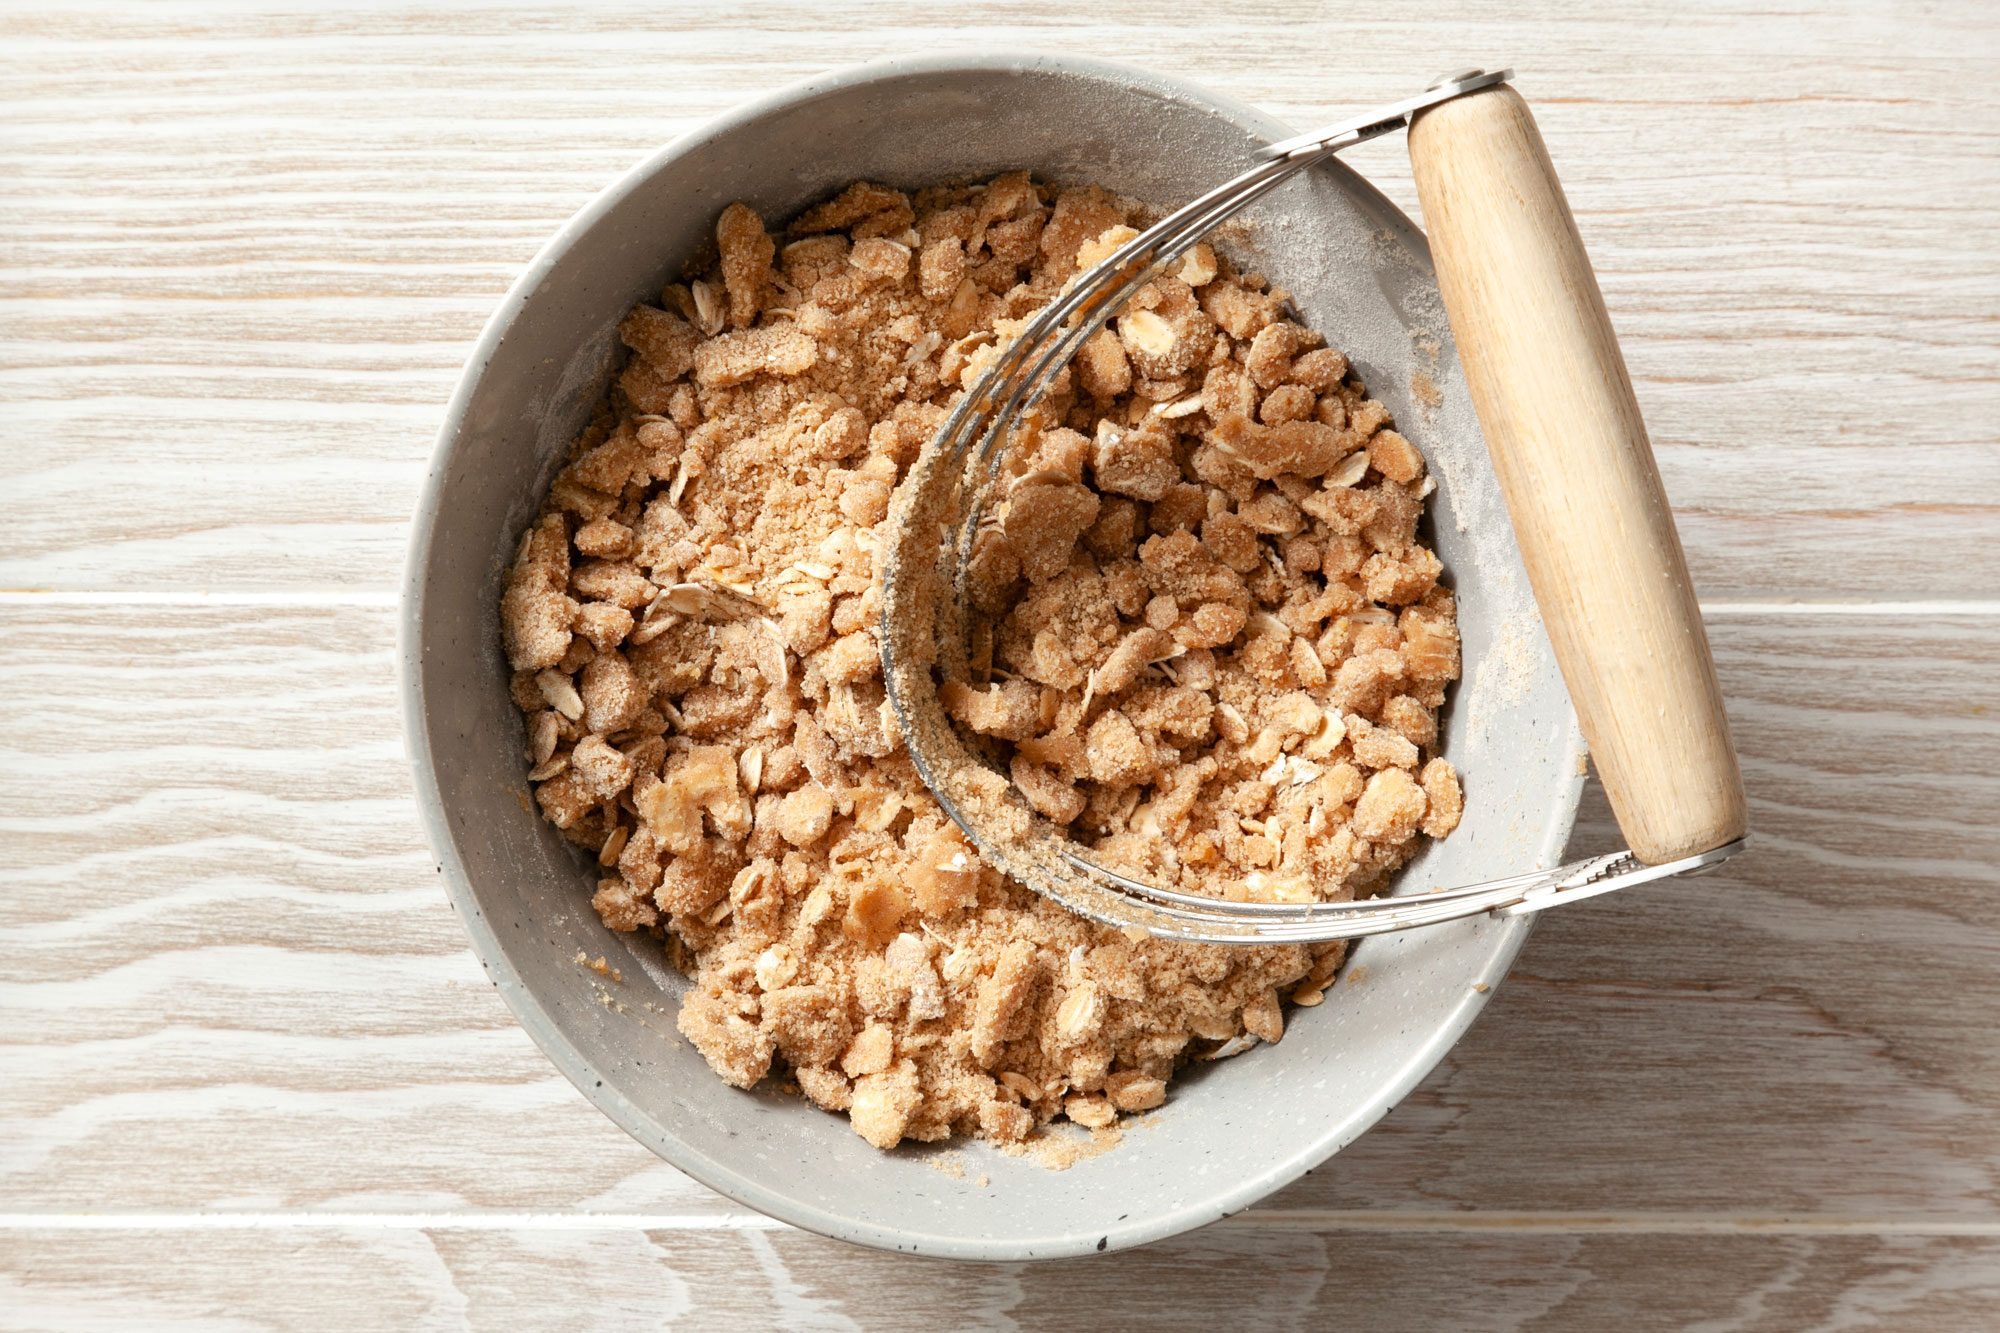 overhead shot; wooden background; In a small bowl, combine brown sugar, flour, oats, and other ingredients;